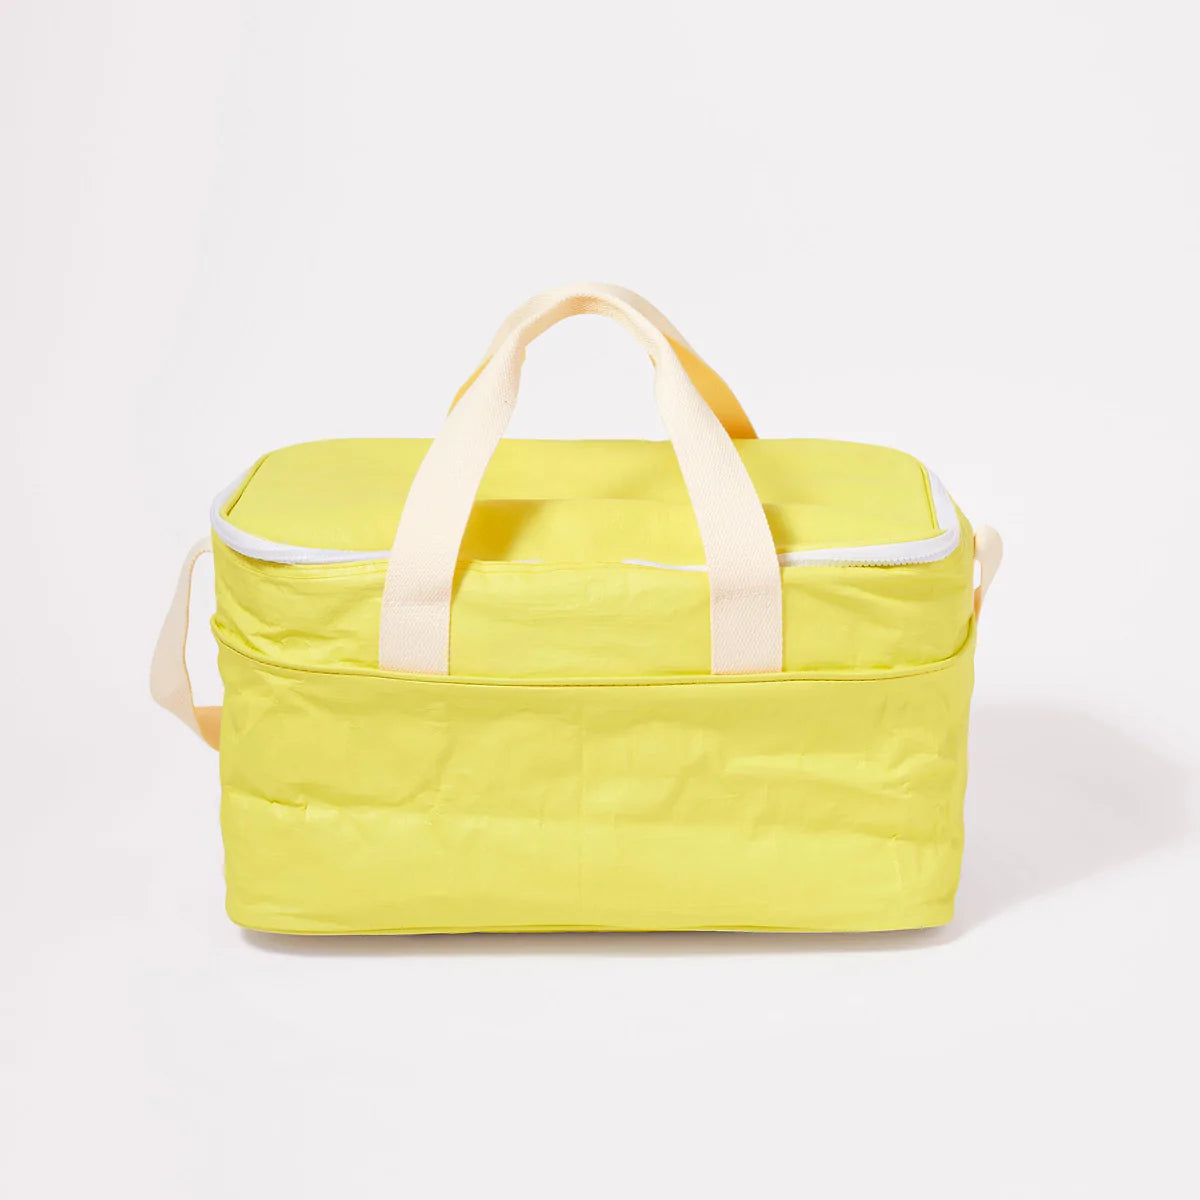 Sunnylife Large Cooler Bag in Limoncello